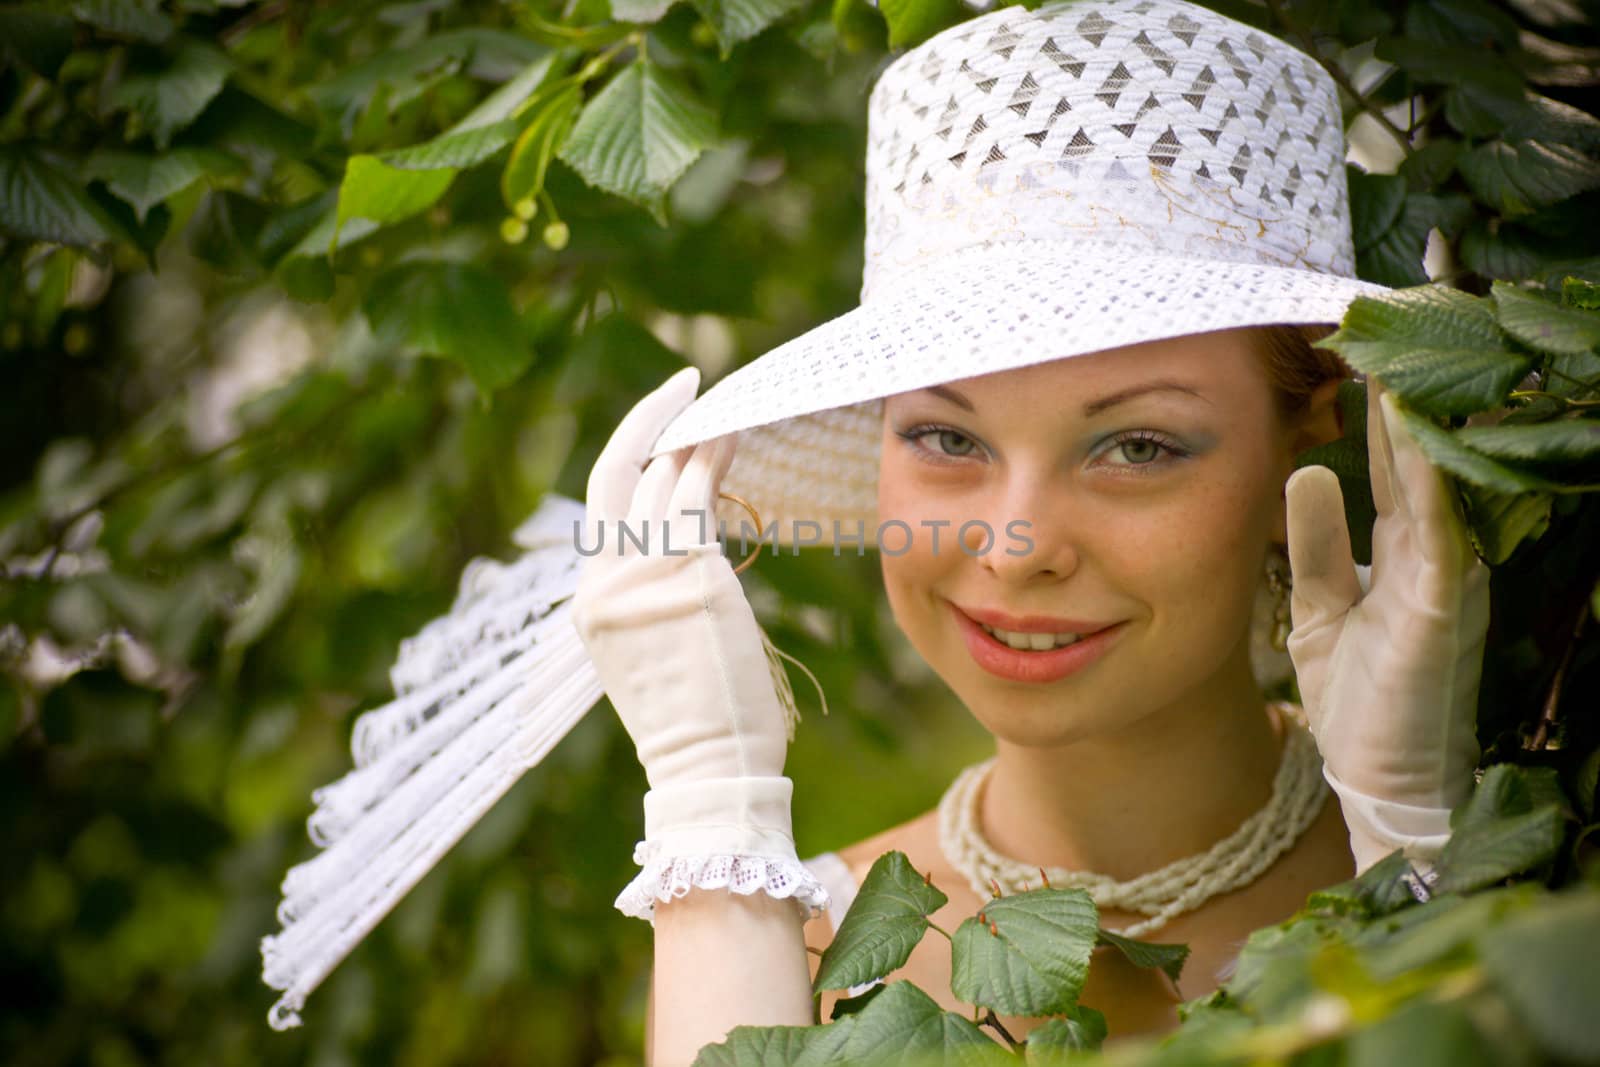 Young lady wearing white hat posing in leaf